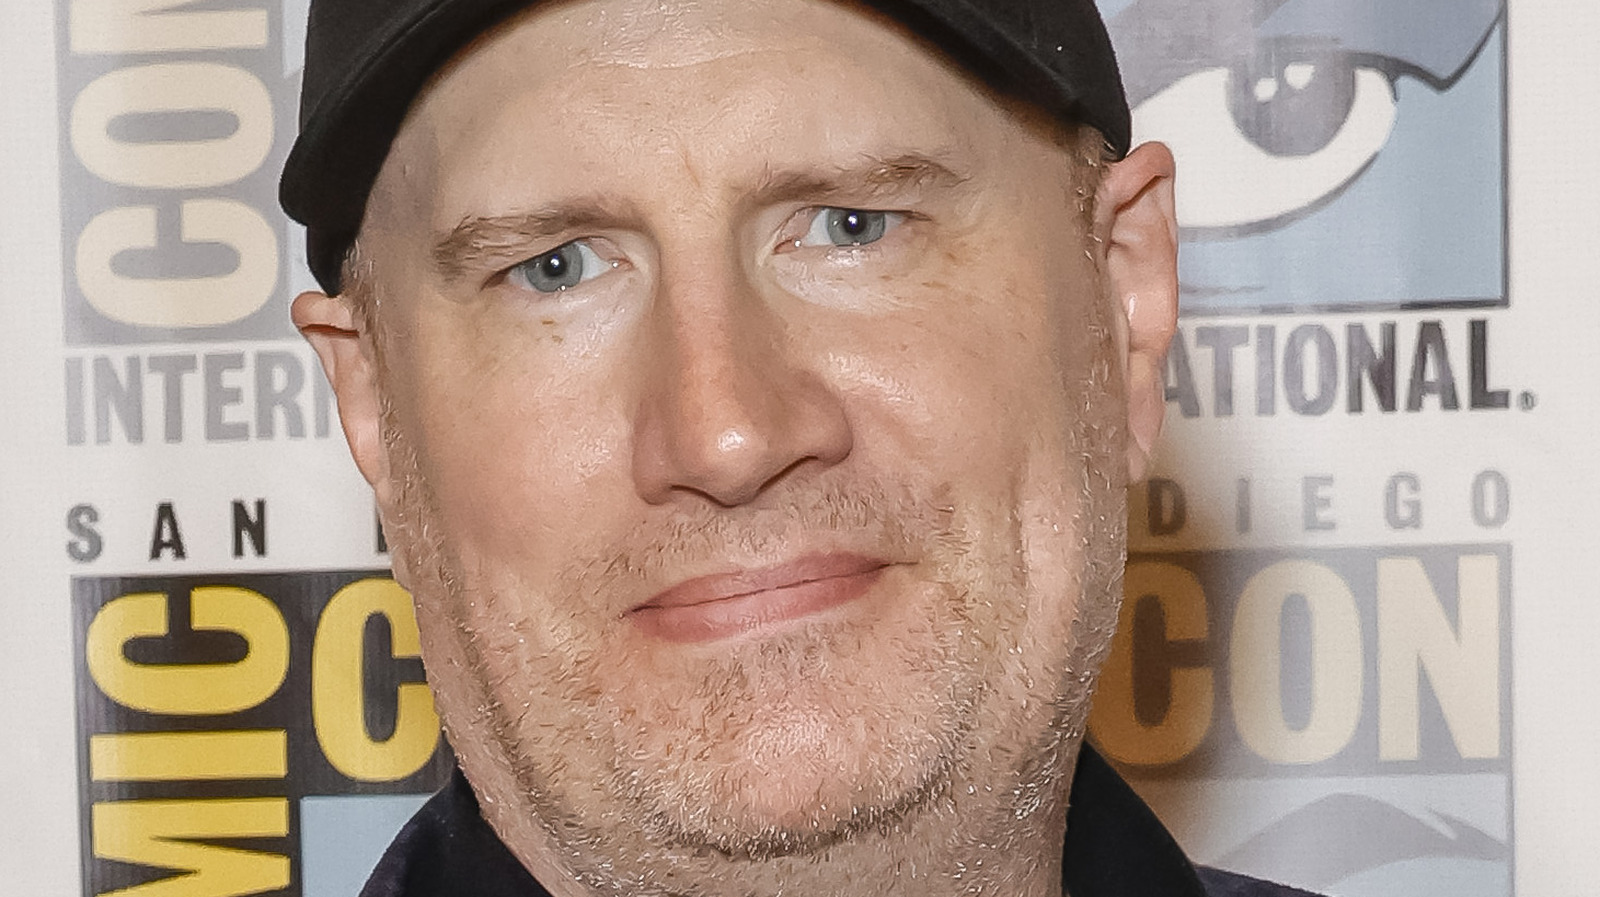 Kevin Feige pushed for Avengers: Endgame not to be Infinity War